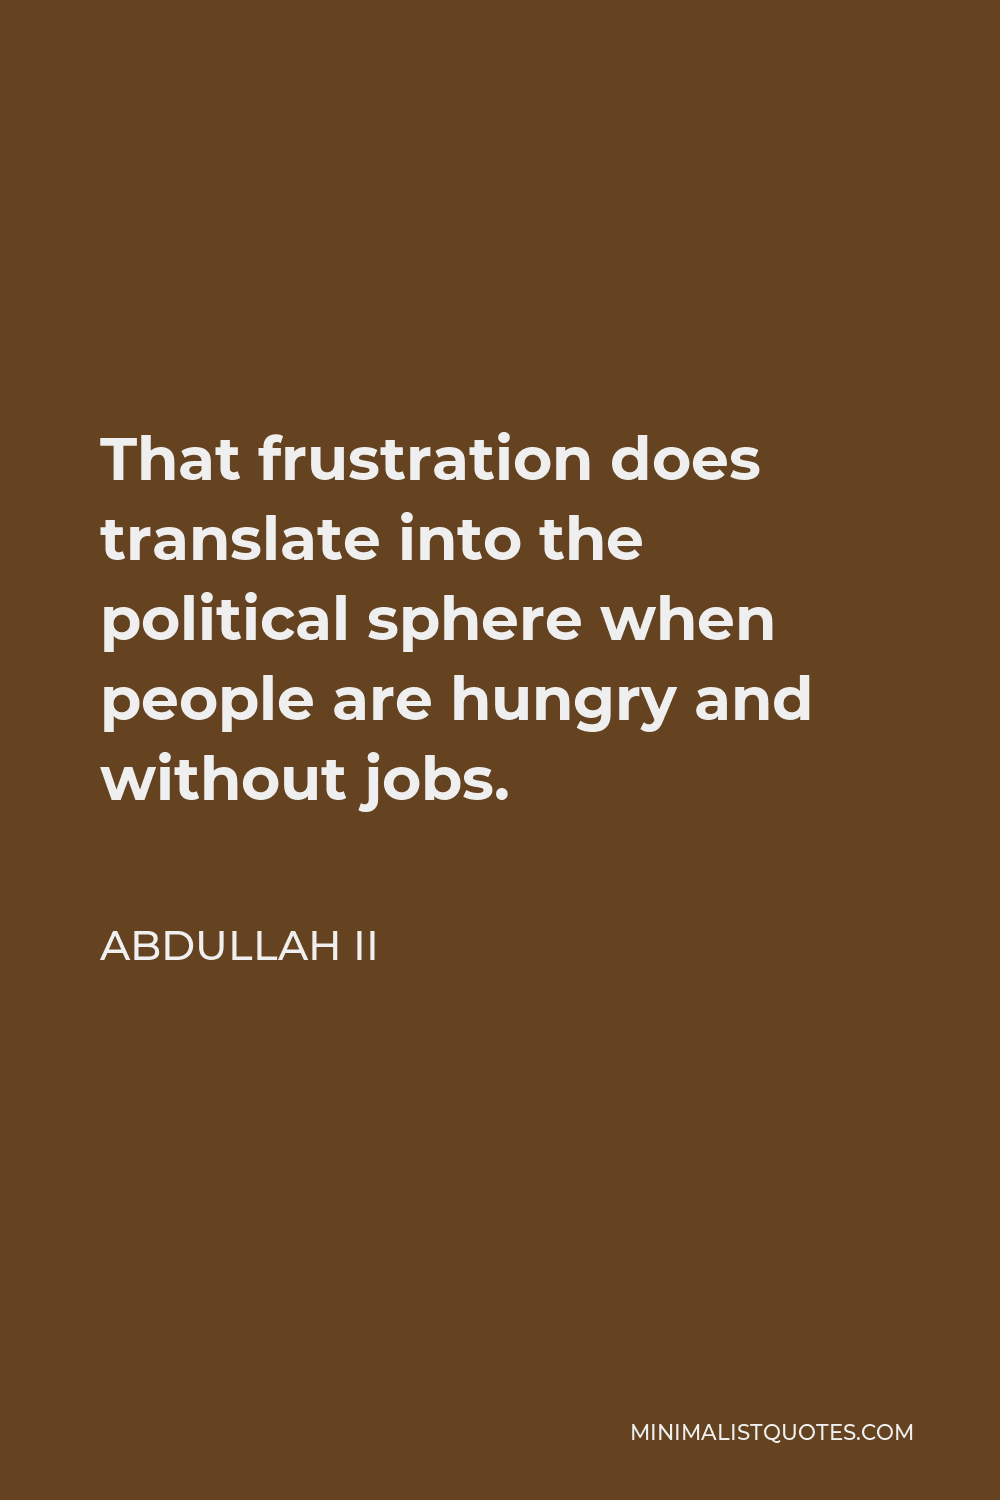 Abdullah II Quote - That frustration does translate into the political sphere when people are hungry and without jobs.